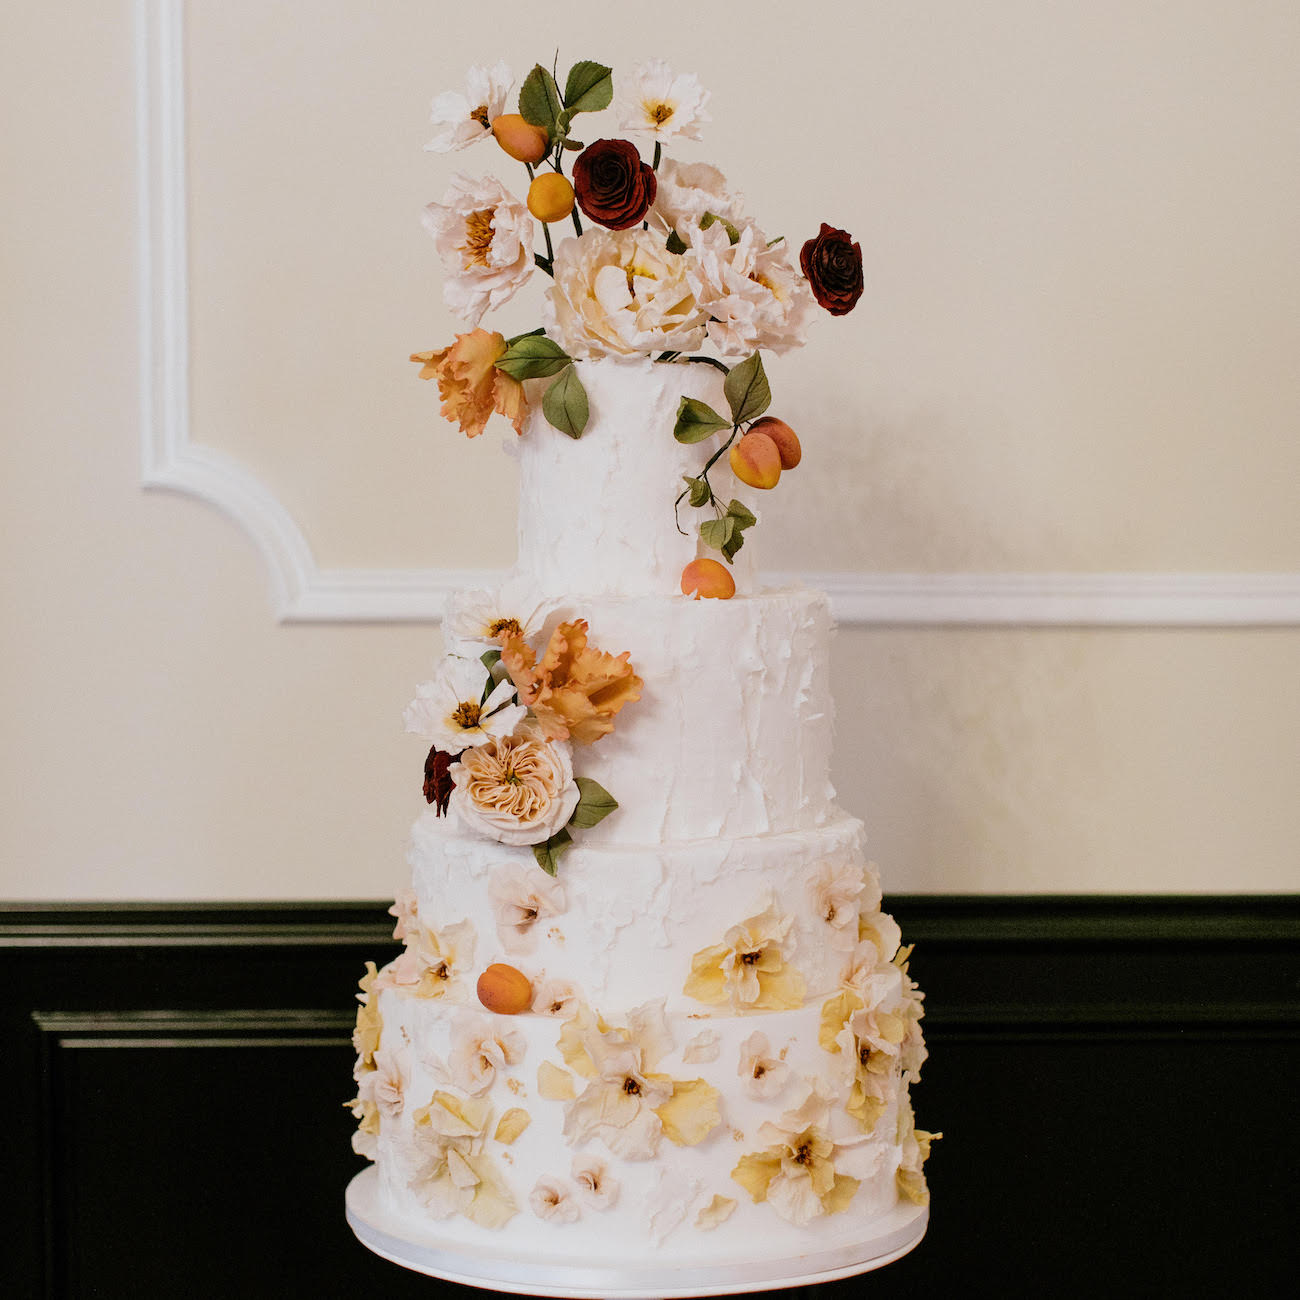 cake with organic details like florals and greenery